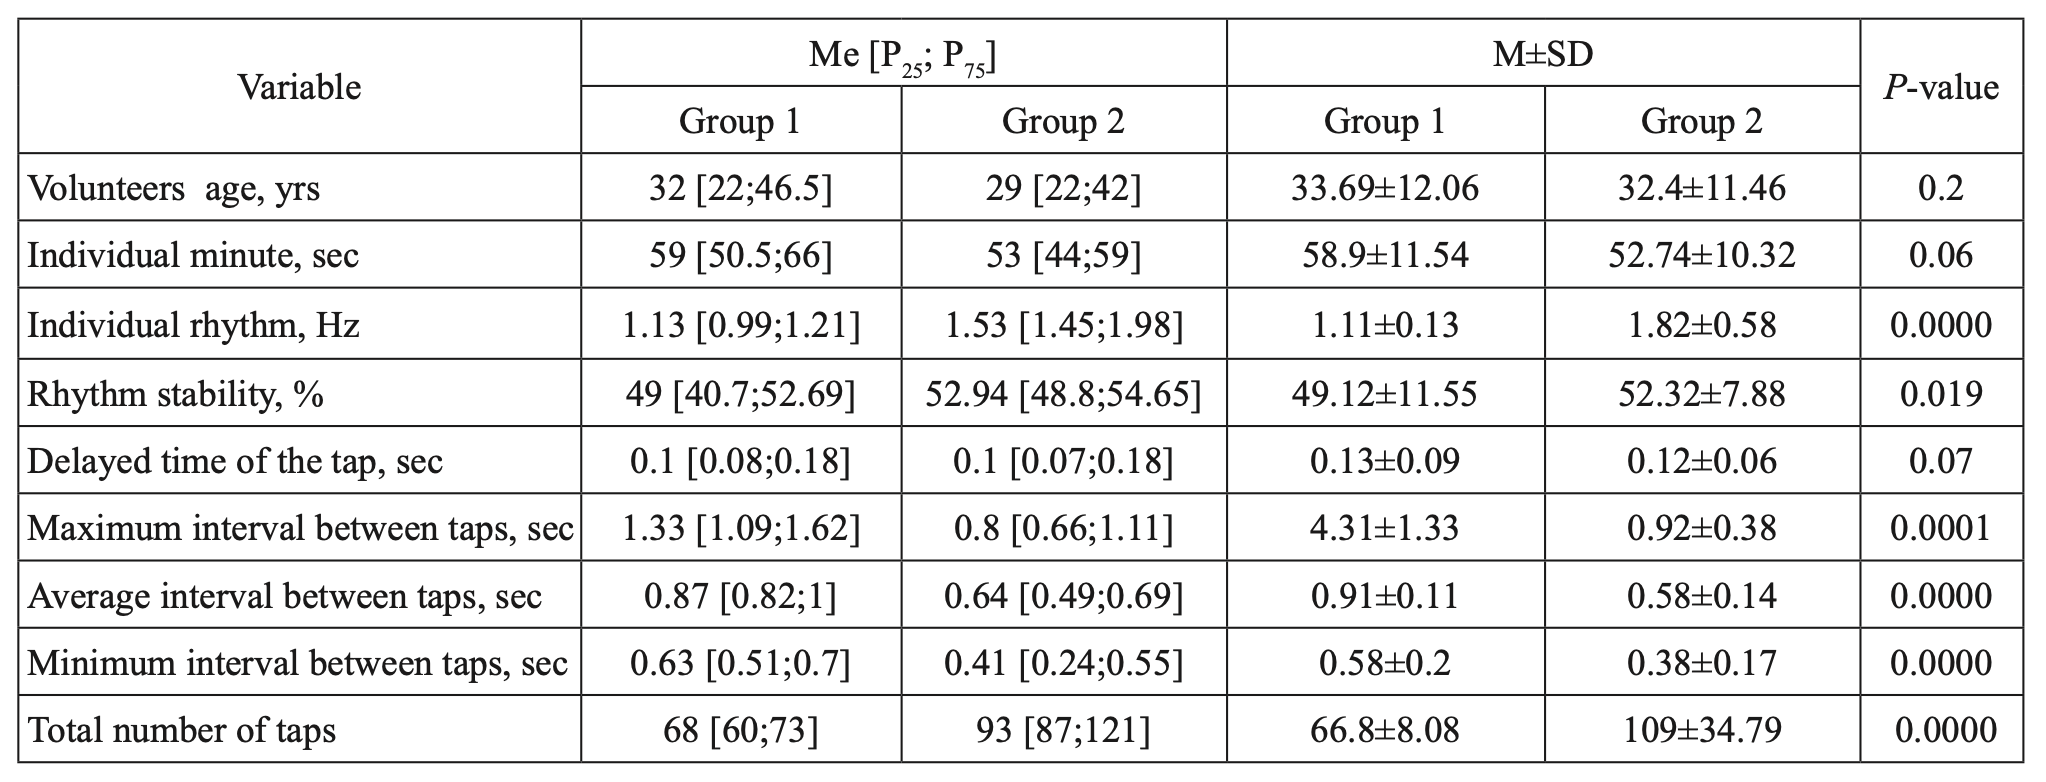 Table 3. Comparison of wrist tapping parameters in Groups 1 and 2